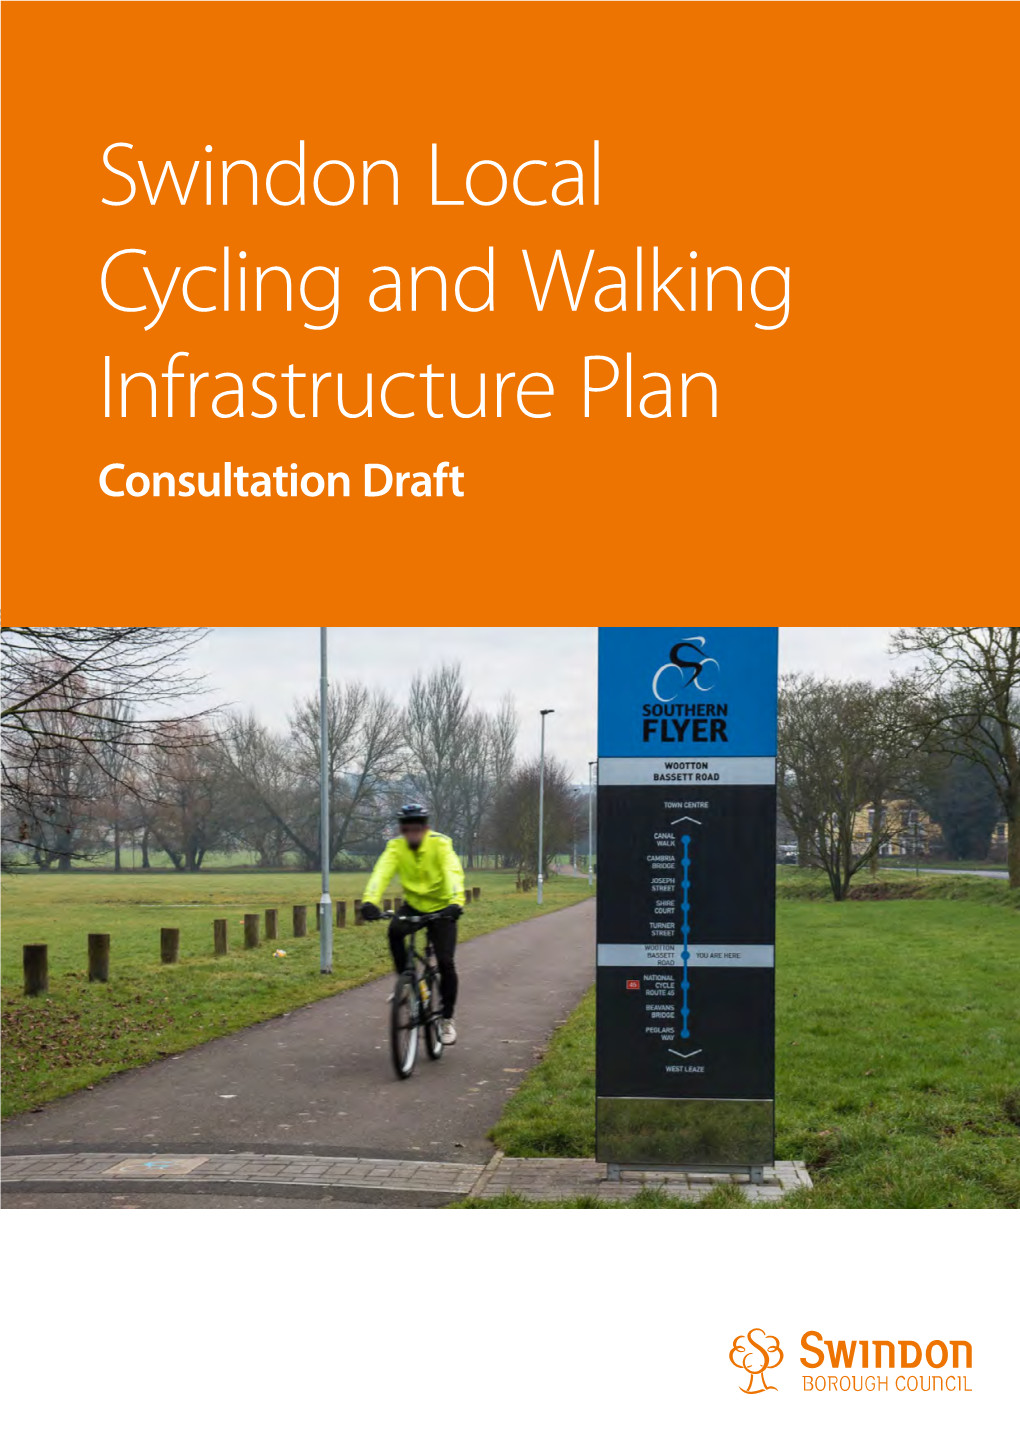 Swindon Local Cycling and Walking Infrastructure Plan Consultation Draft Contents